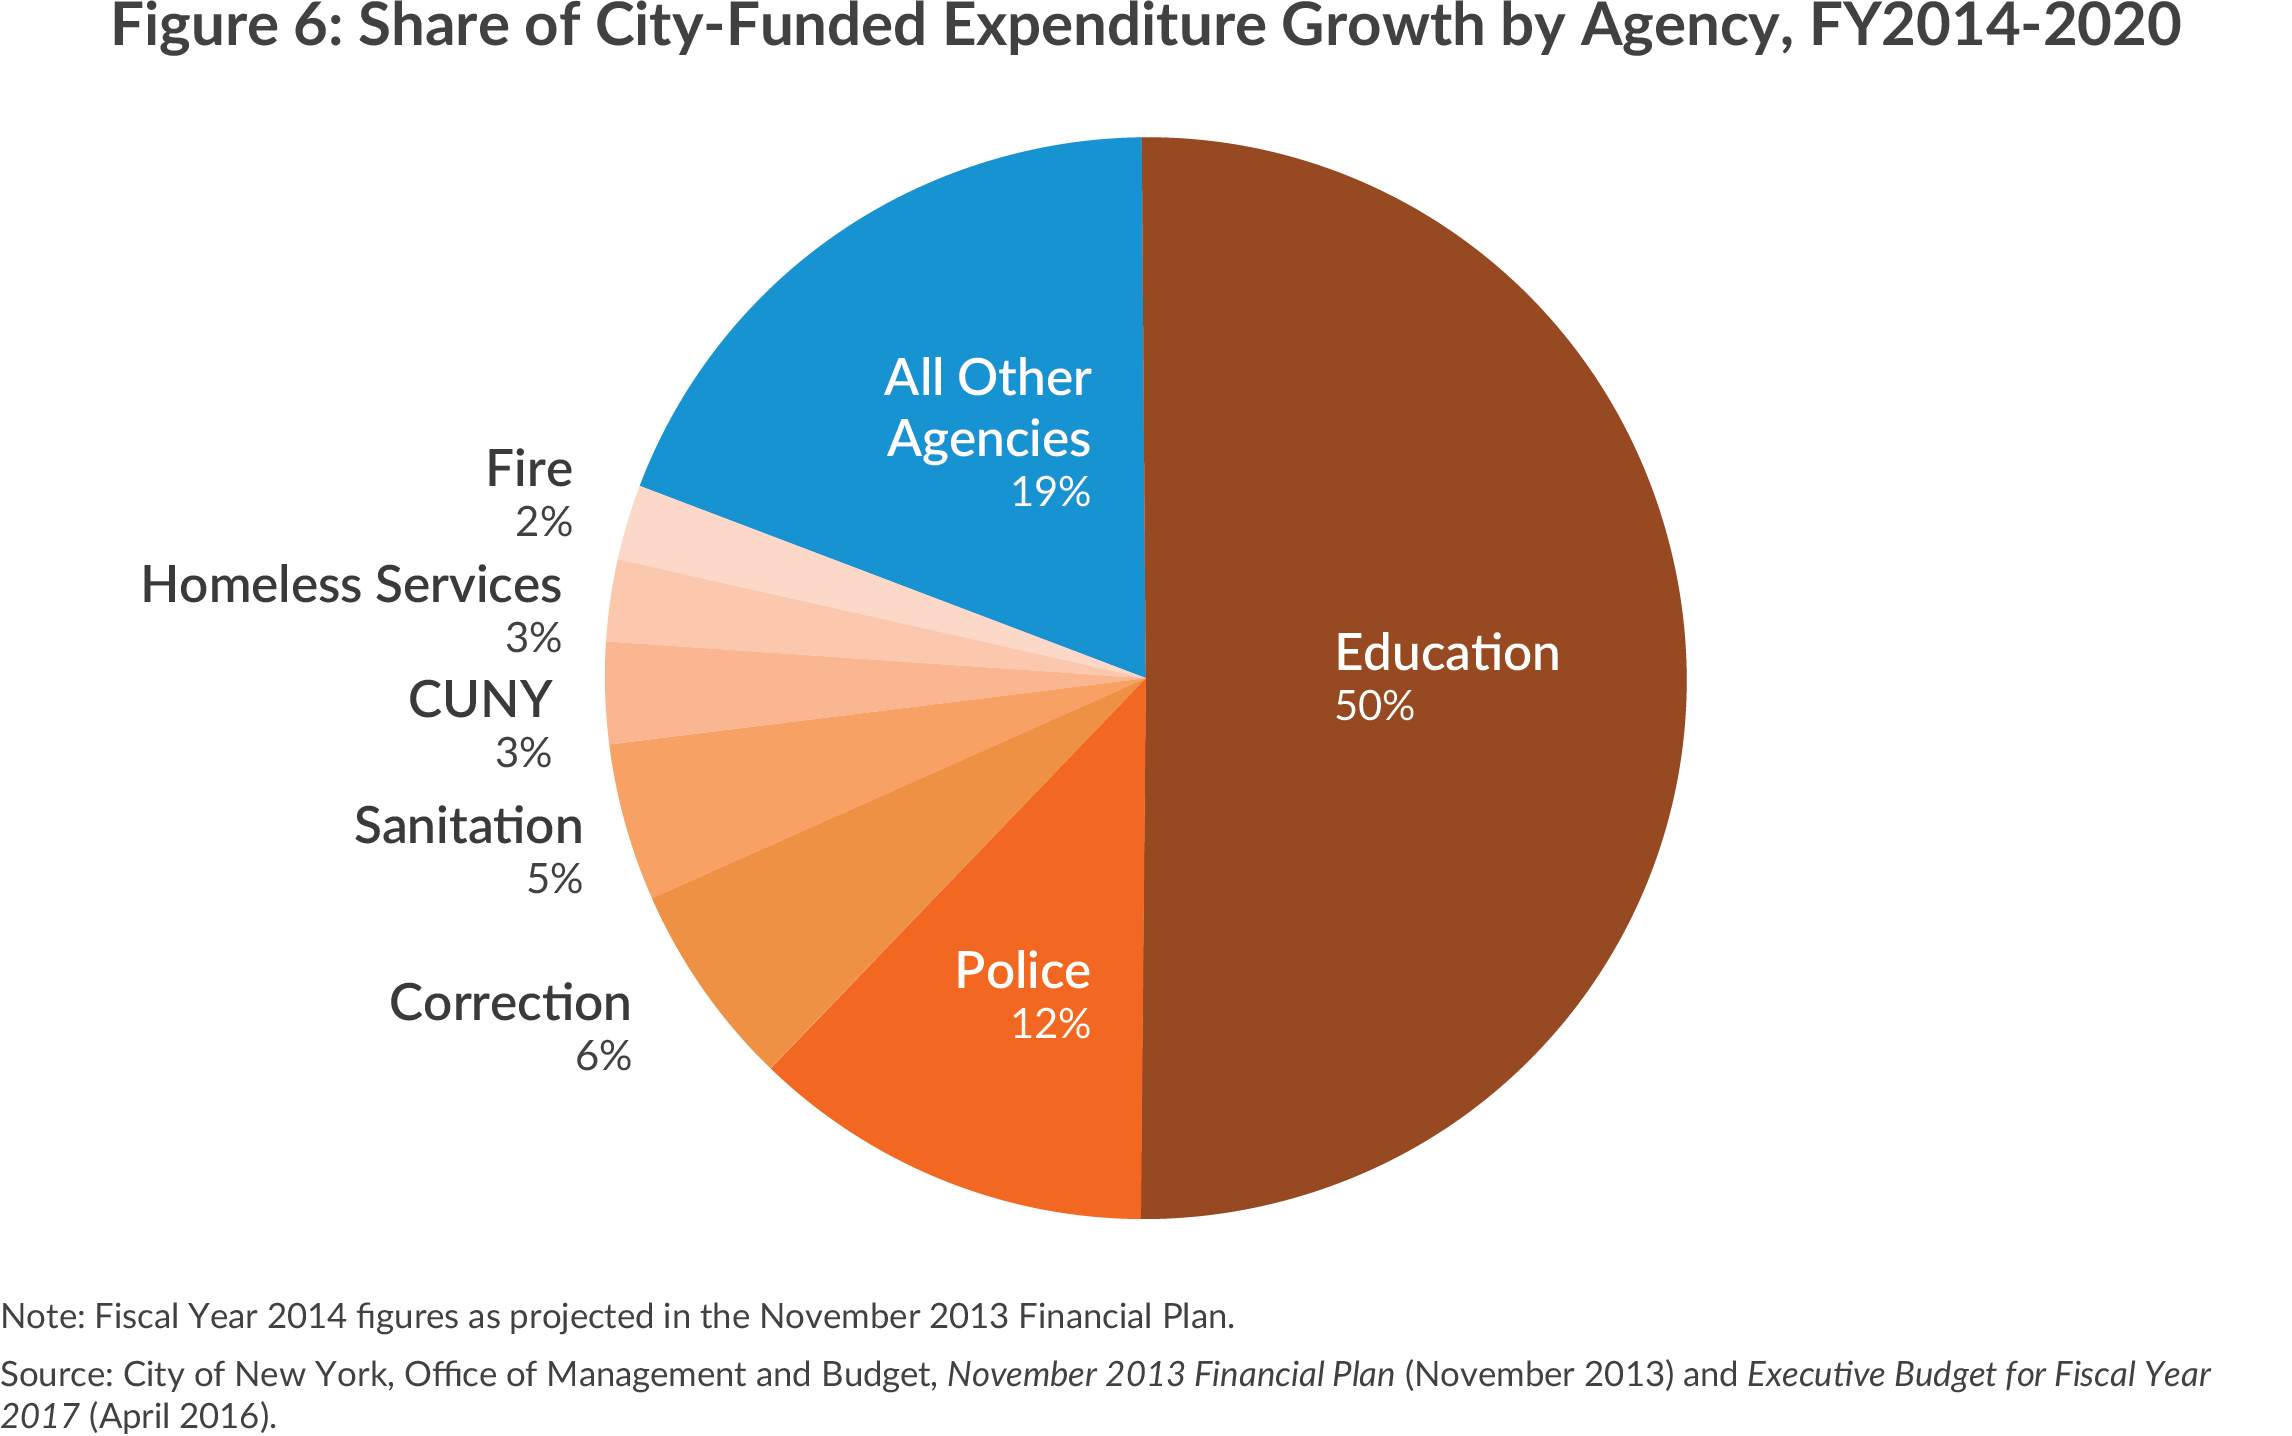 Share of city-funded expenditure growth by agency, 2014-2020